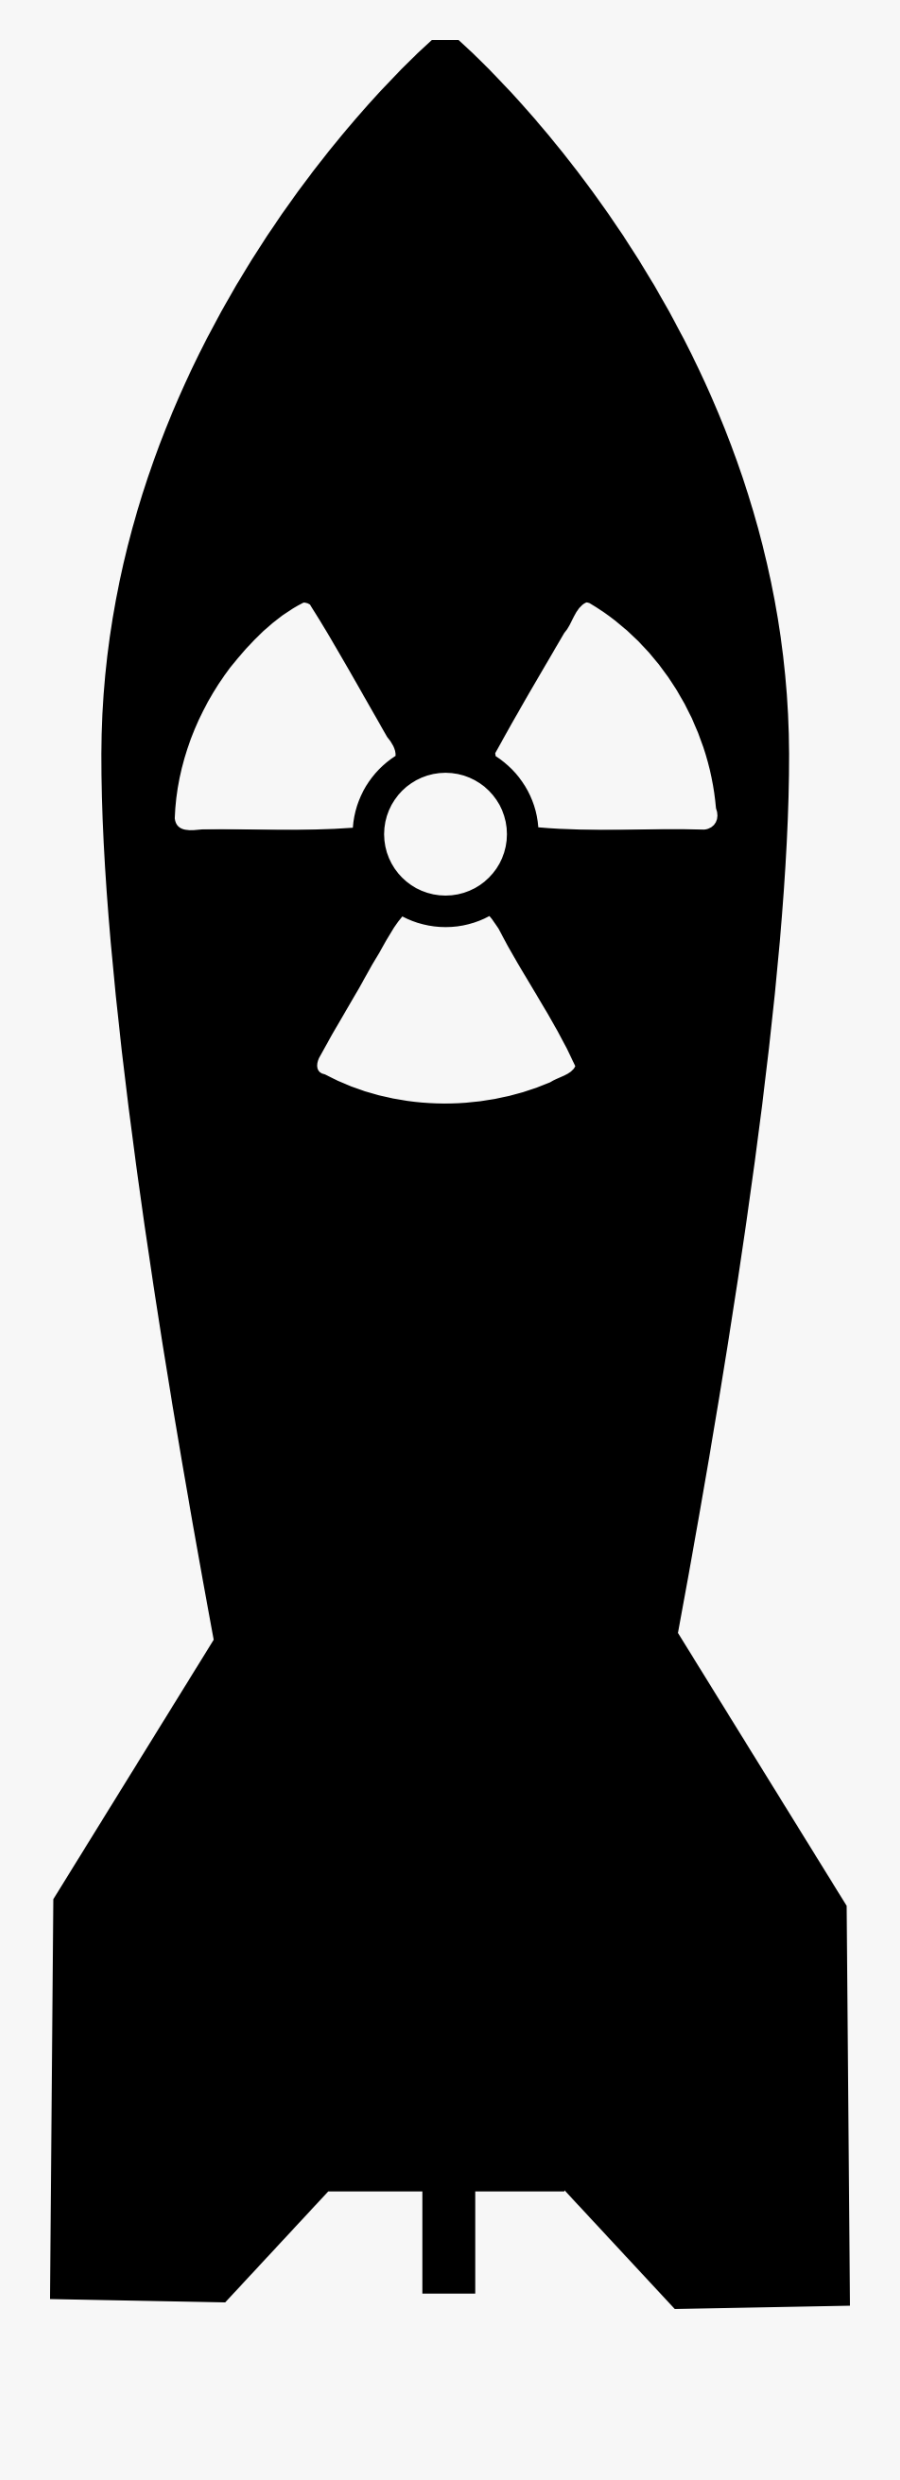 Atomic Bombings Of Hiroshima And Nagasaki Nuclear Weapon - Nuclear Weapon Clipart Black And White, Transparent Clipart